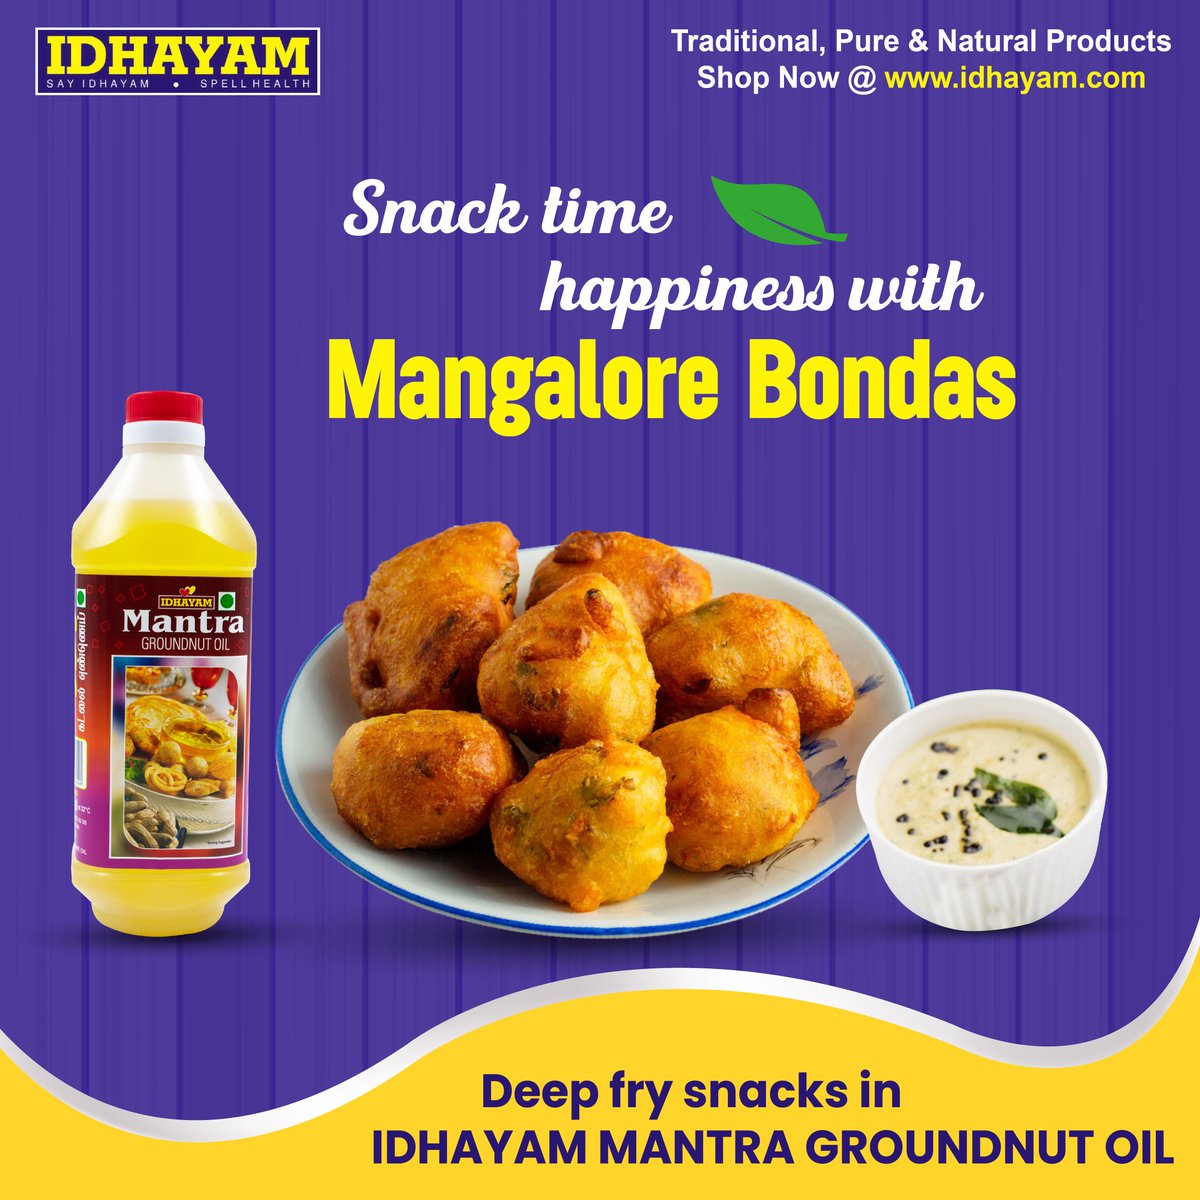 Snack time happiness with Mangalore Bondas 😋
Deep fry snacks in IDHAYAM MANTRA GROUNDNUT OIL& Shop at - idhayam.com

#idhayammantra #mangalorebonda #bondas #vegbonda #groundnutoil #snackstime